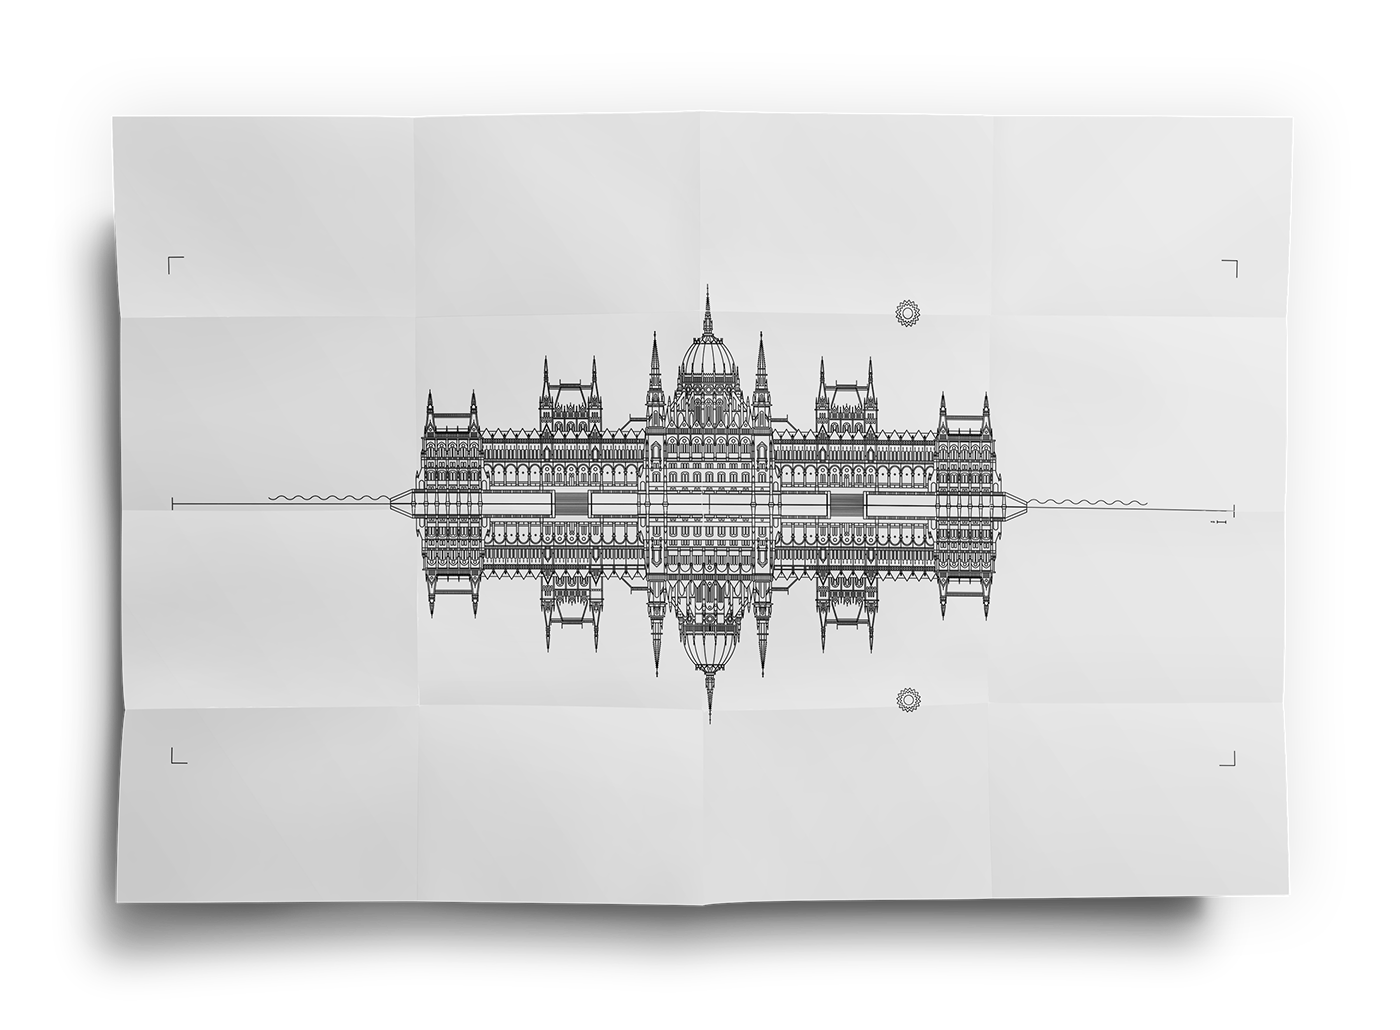 hungary parlament budapest Duna danub Castle heroes city capital traditional gallery vector design pantone famuos